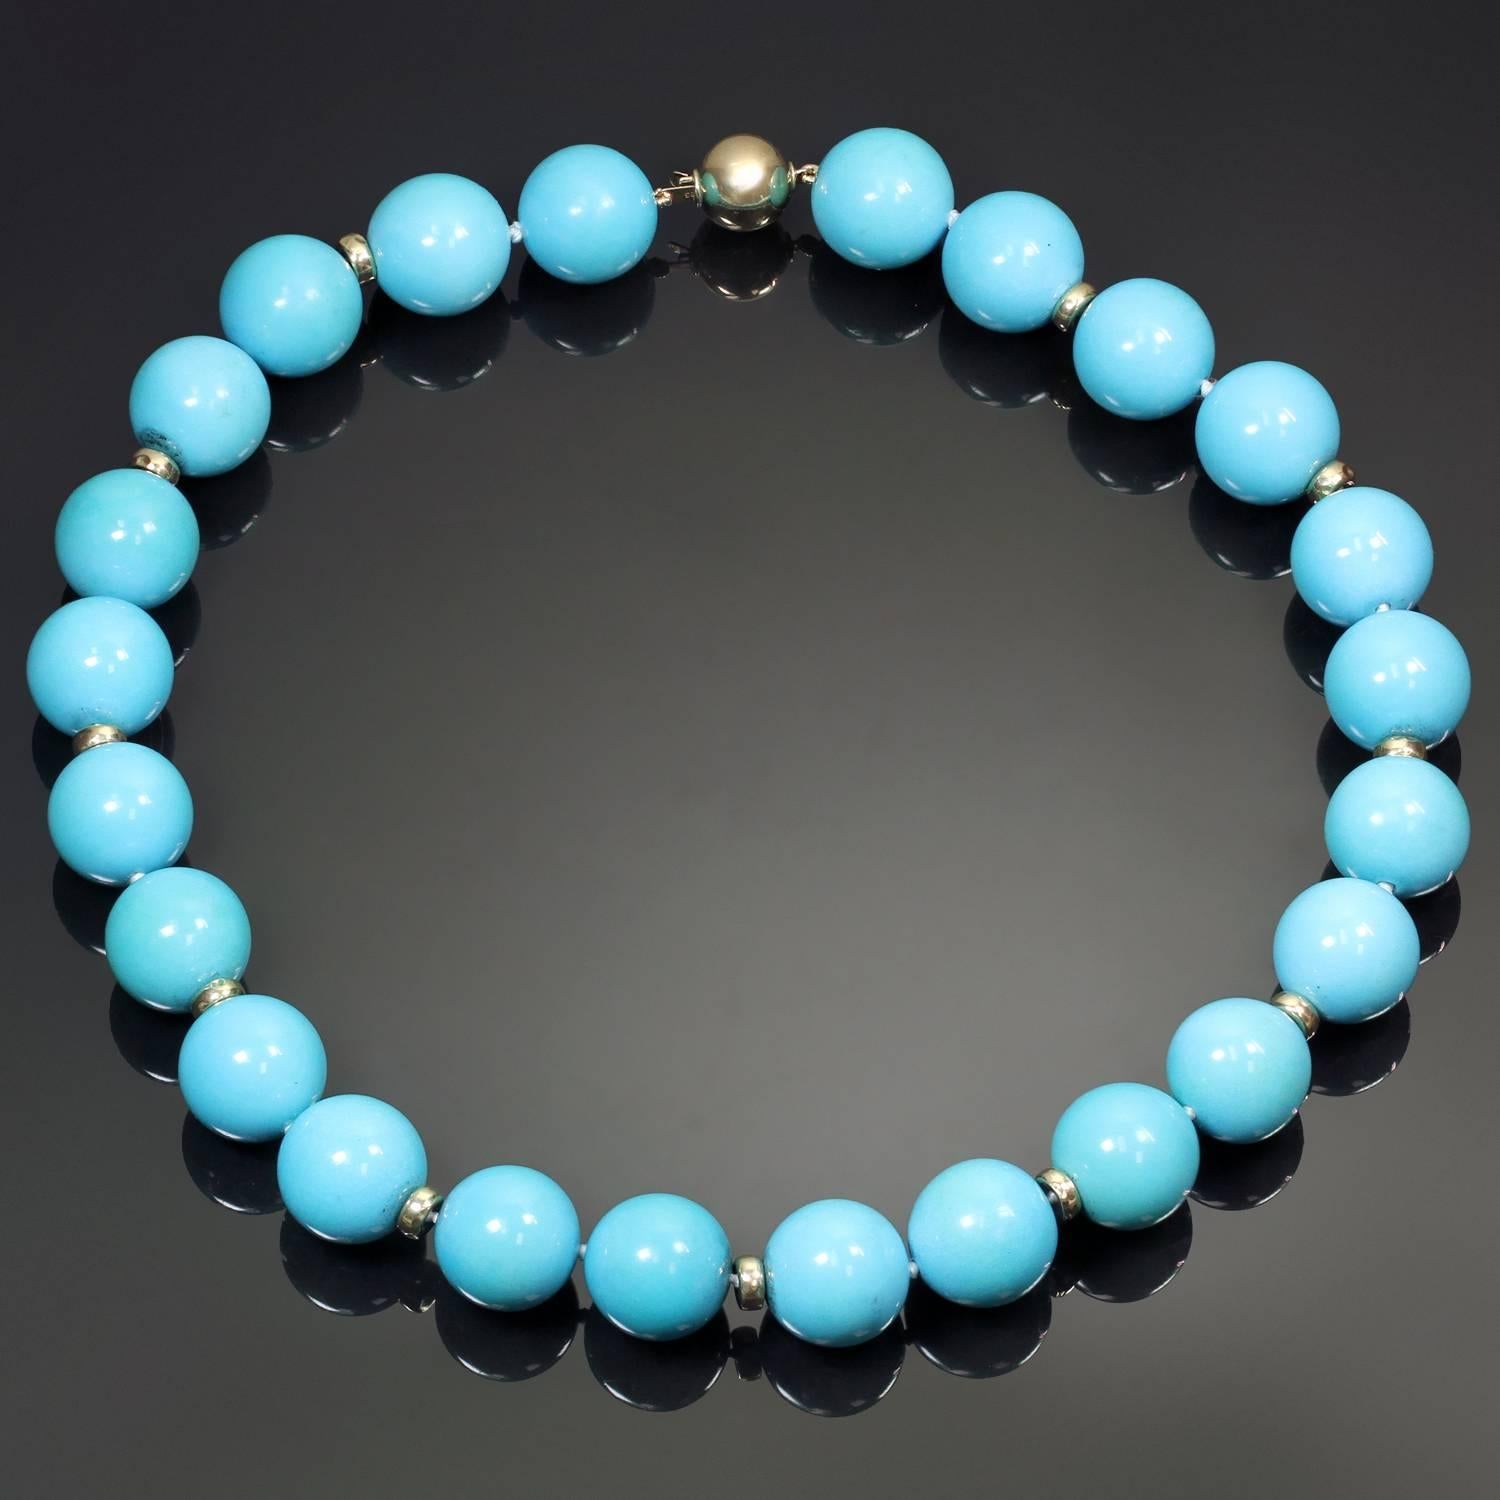 The fabulous necklace is composed of natural turquoise beads of stunning blue color, measuring 16.70 mm to 17.10 mm, and accented wit gold rondelles and a 14k gold clasp. A bold statement piece.  Measurements: 18